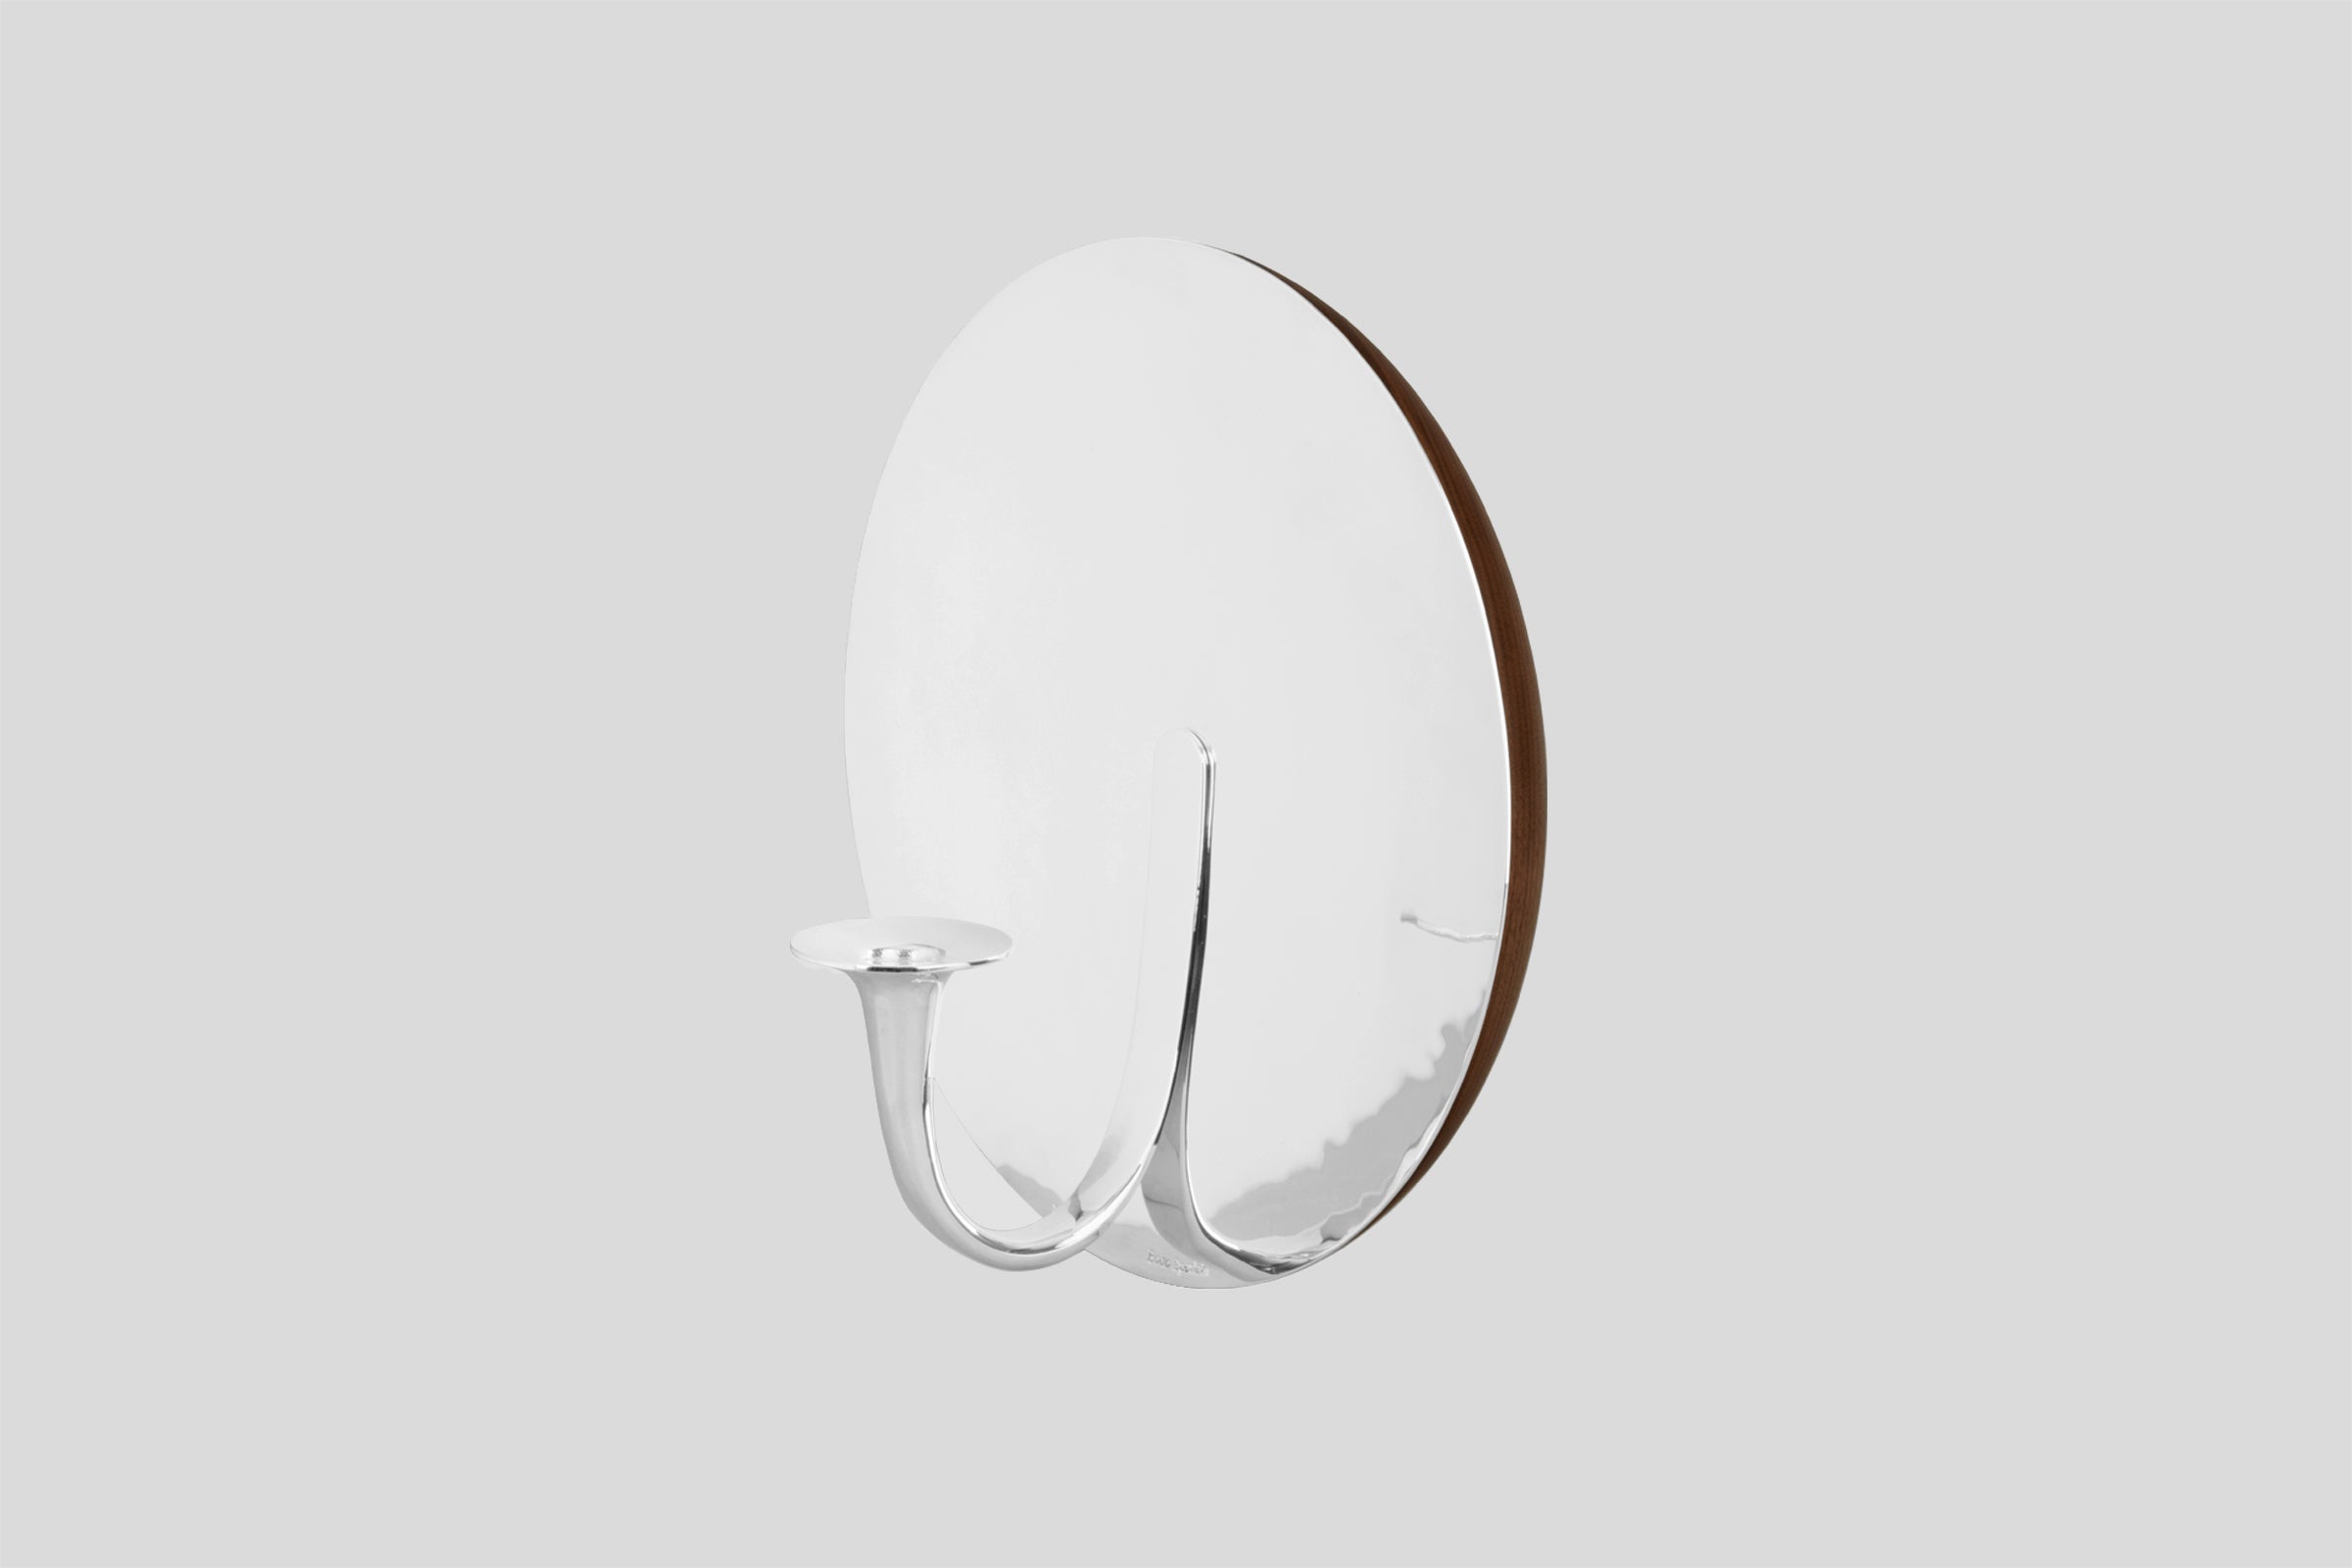 Tane Silver Moon Sconce